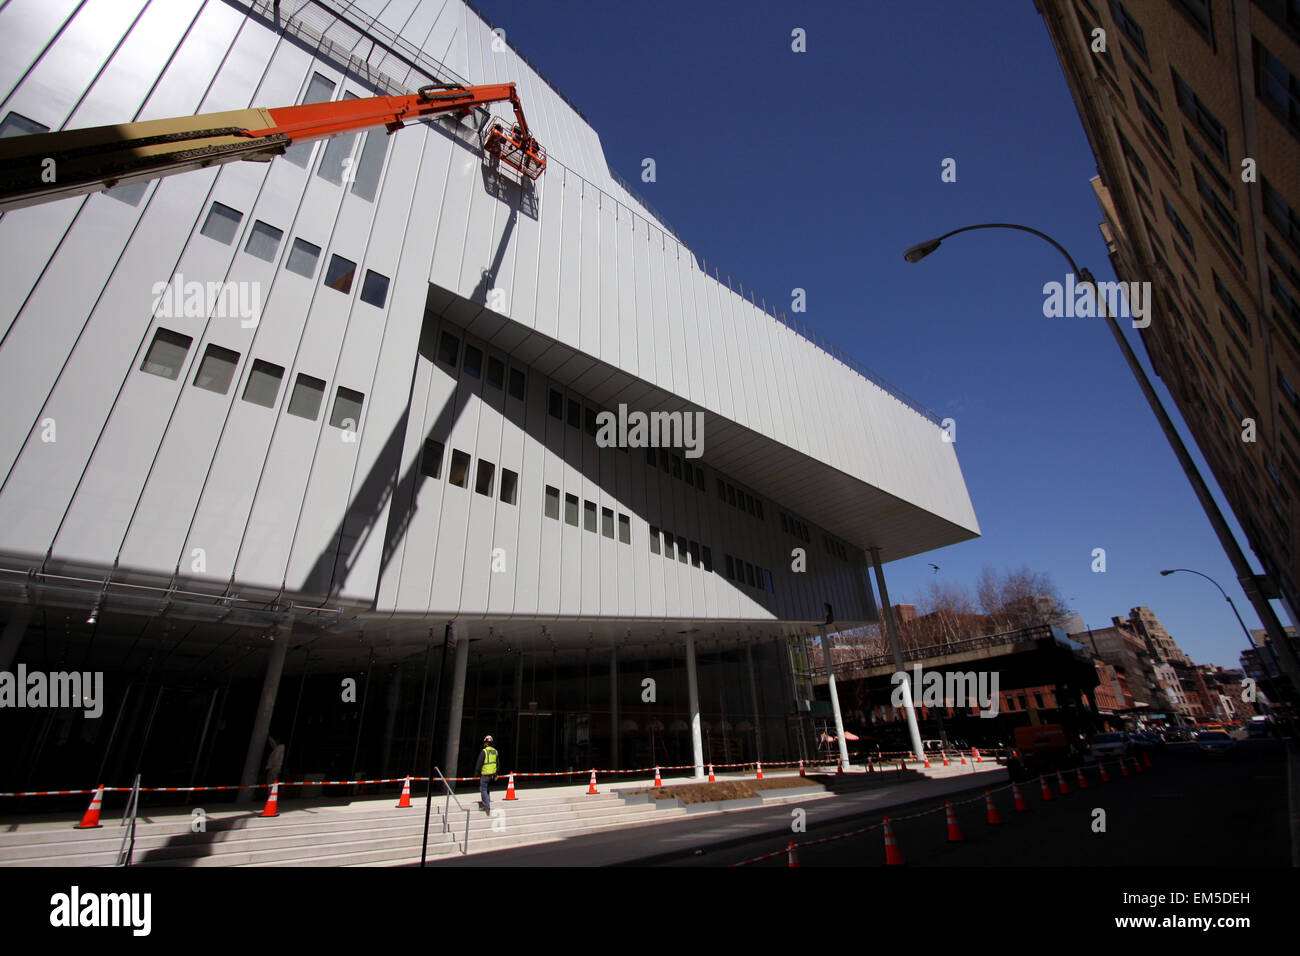 New York, USA. 15th Apr, 2015. Construction workers putting finishing touches on the new Whitney Museum of American Art building at Washington Street and Gansevoort Street, in New York City's Meatpacking District at the end of the High Line.   Designed by architect Renzo Piano, the 200,000-square-foot space will open to the public on May 1st, 2015        London 2012  - Olympics:   Swimming Practice        London 2012  - Olympics:  Diving Practice.        London 2012  - Olympics:  Swimming Practice. Credit:  Adam Stoltman/Alamy Live News Stock Photo